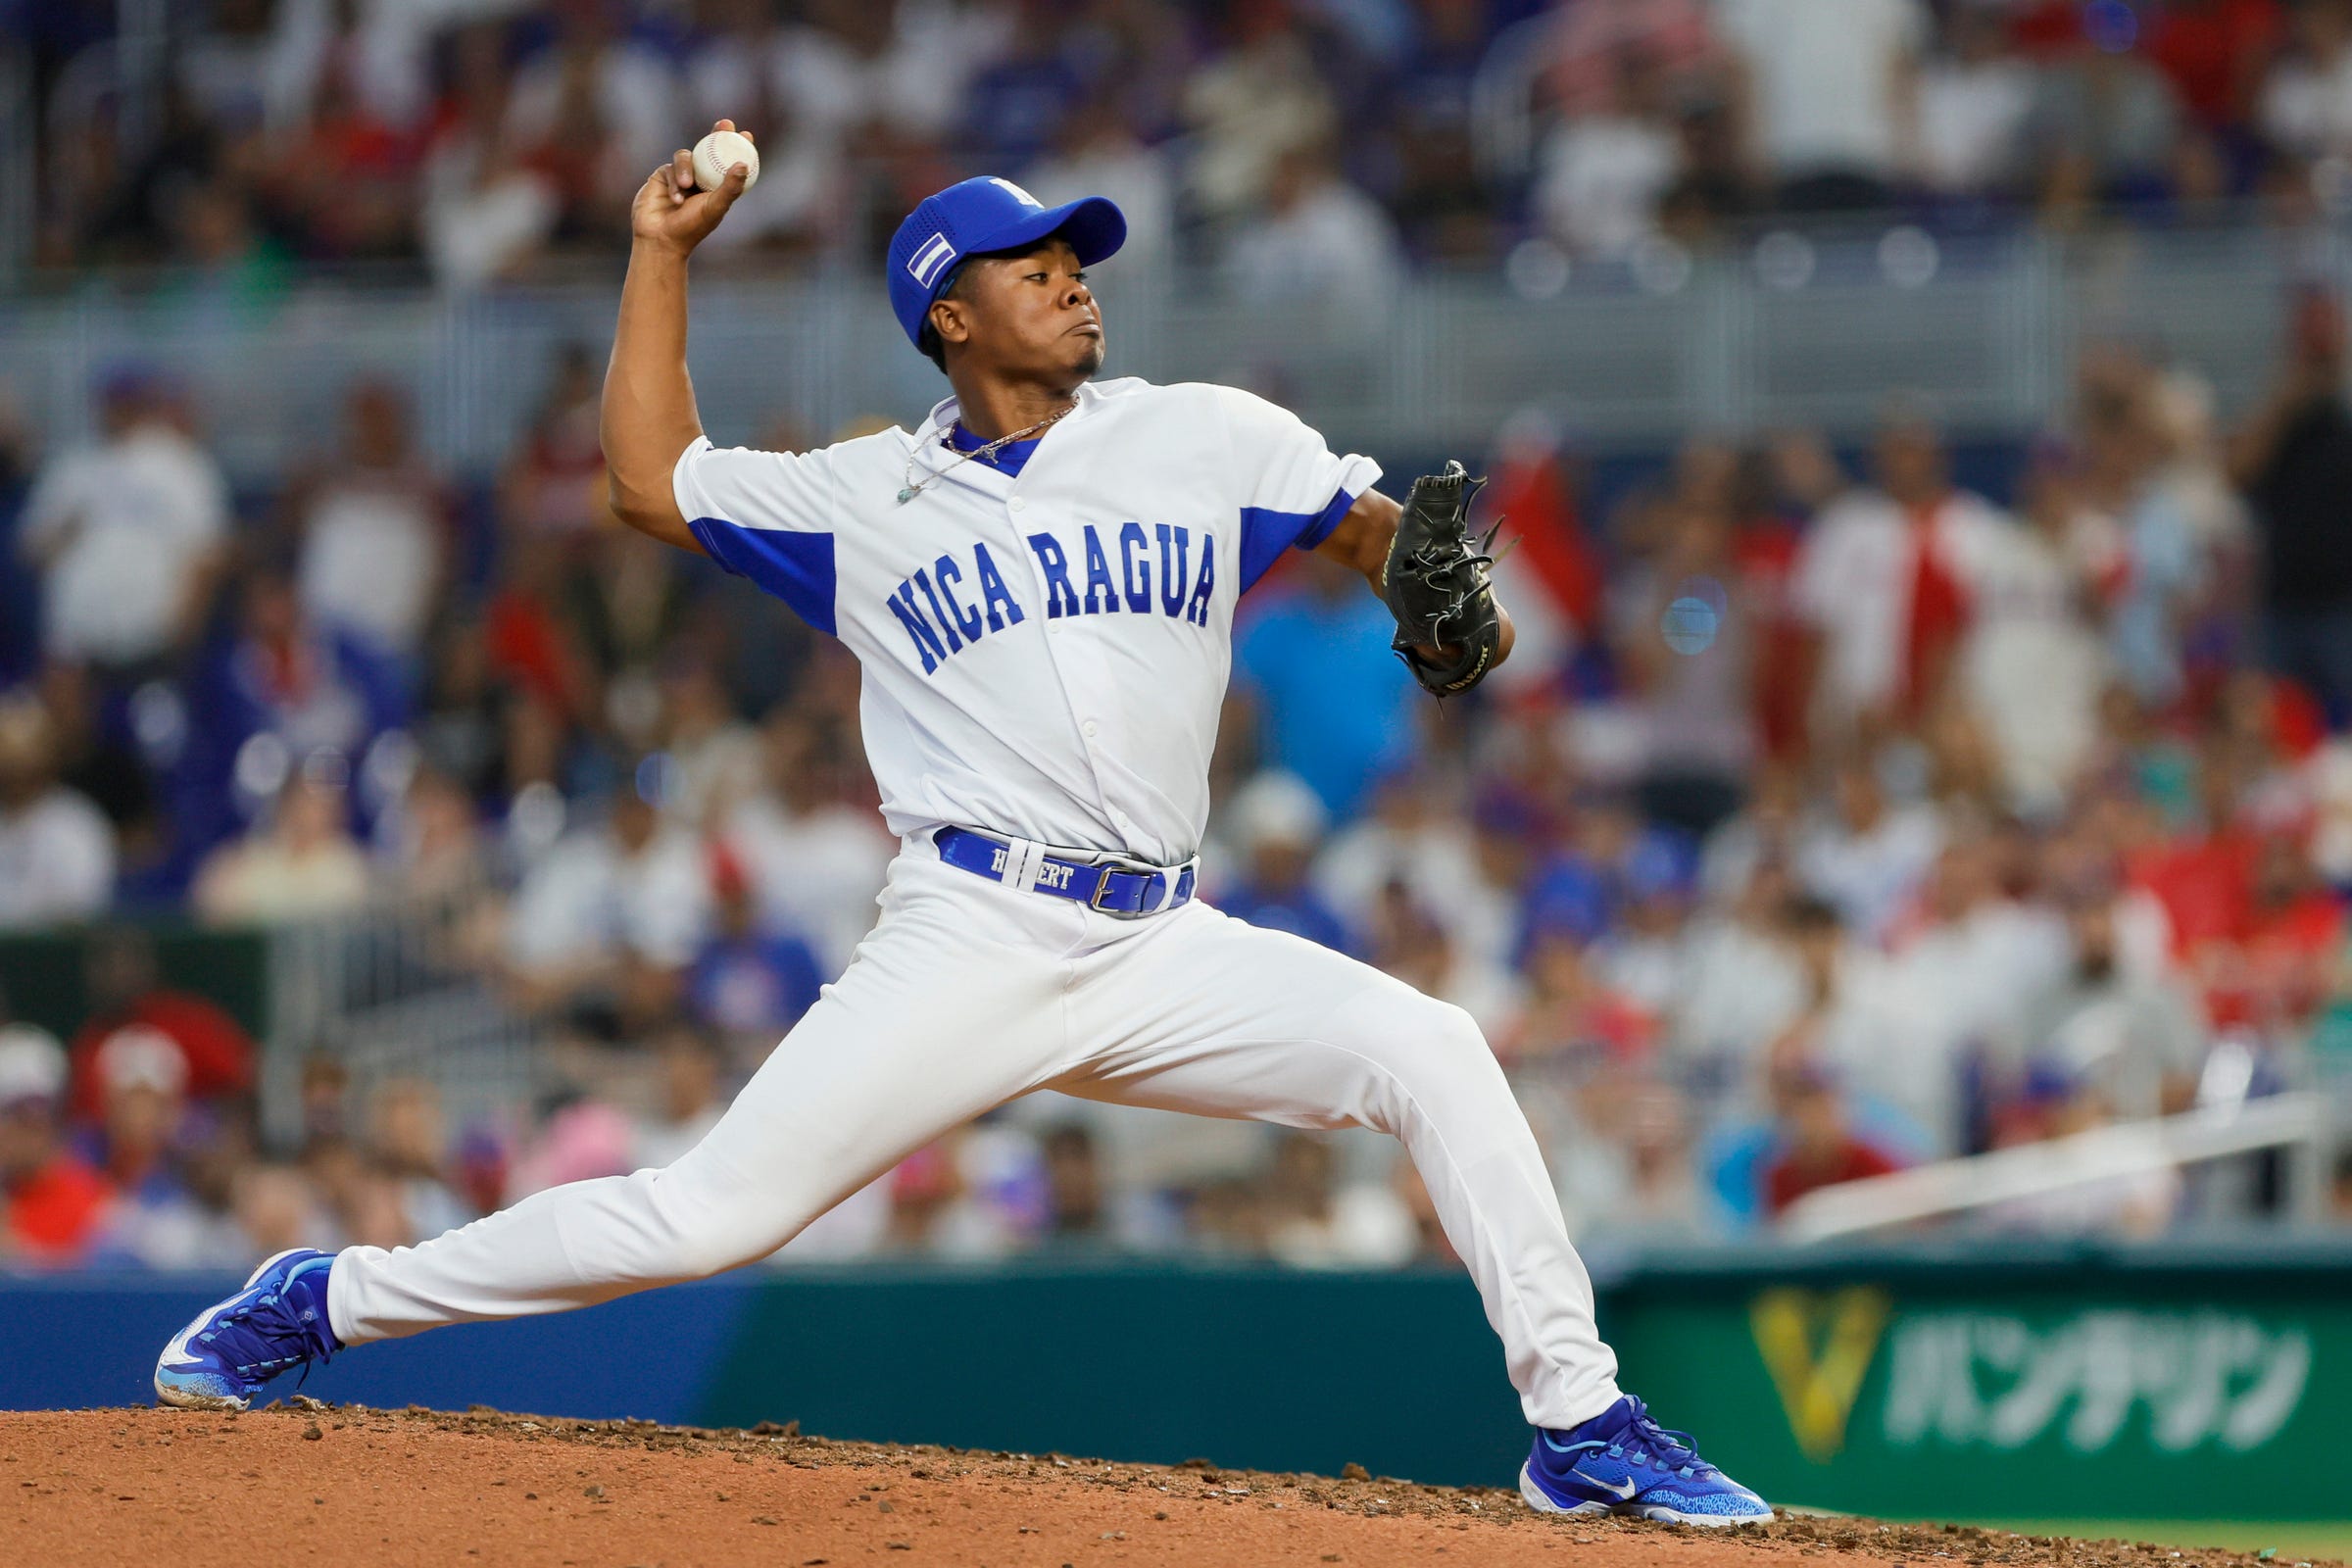 Nicaragua pitcher Duque Hebbert agrees to contract with Detroit Tigers